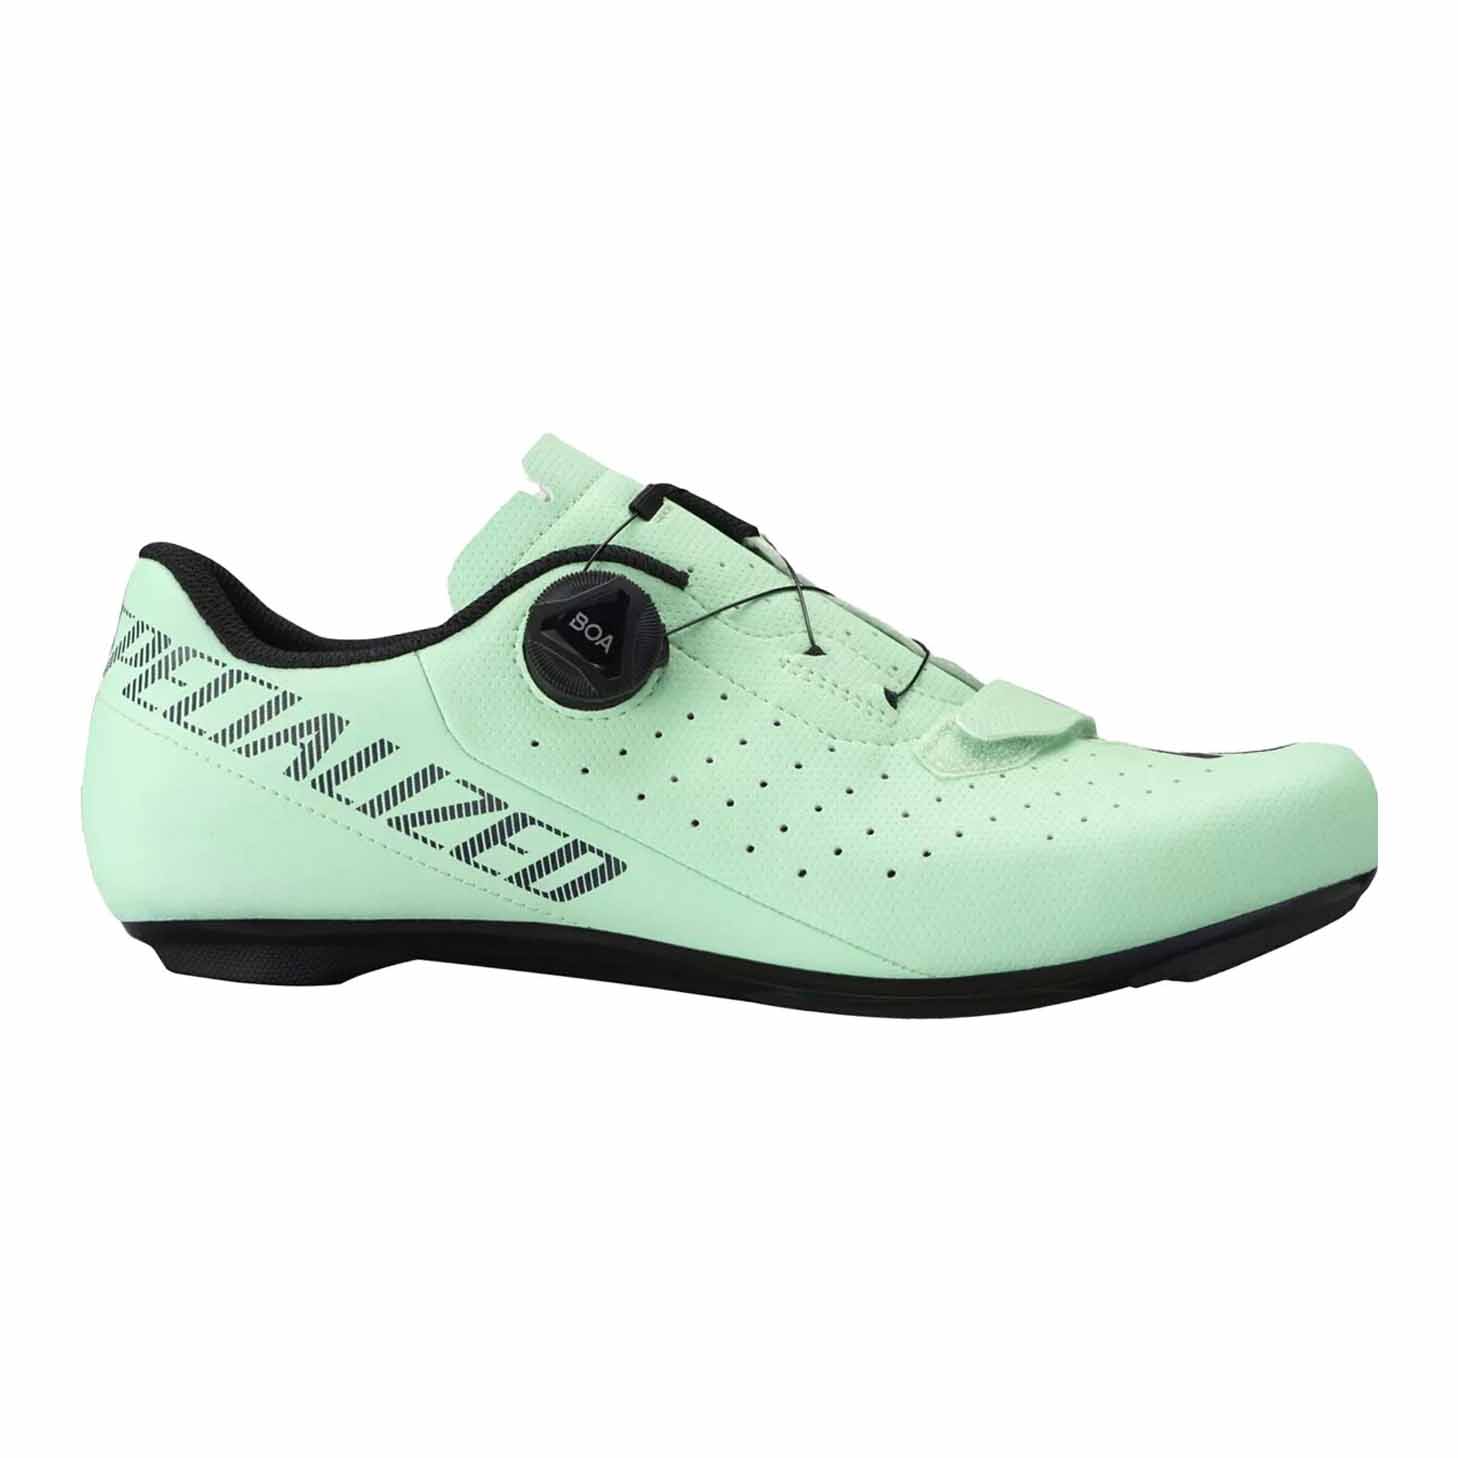 Torch 1.0 Cycling Shoe in oasis green